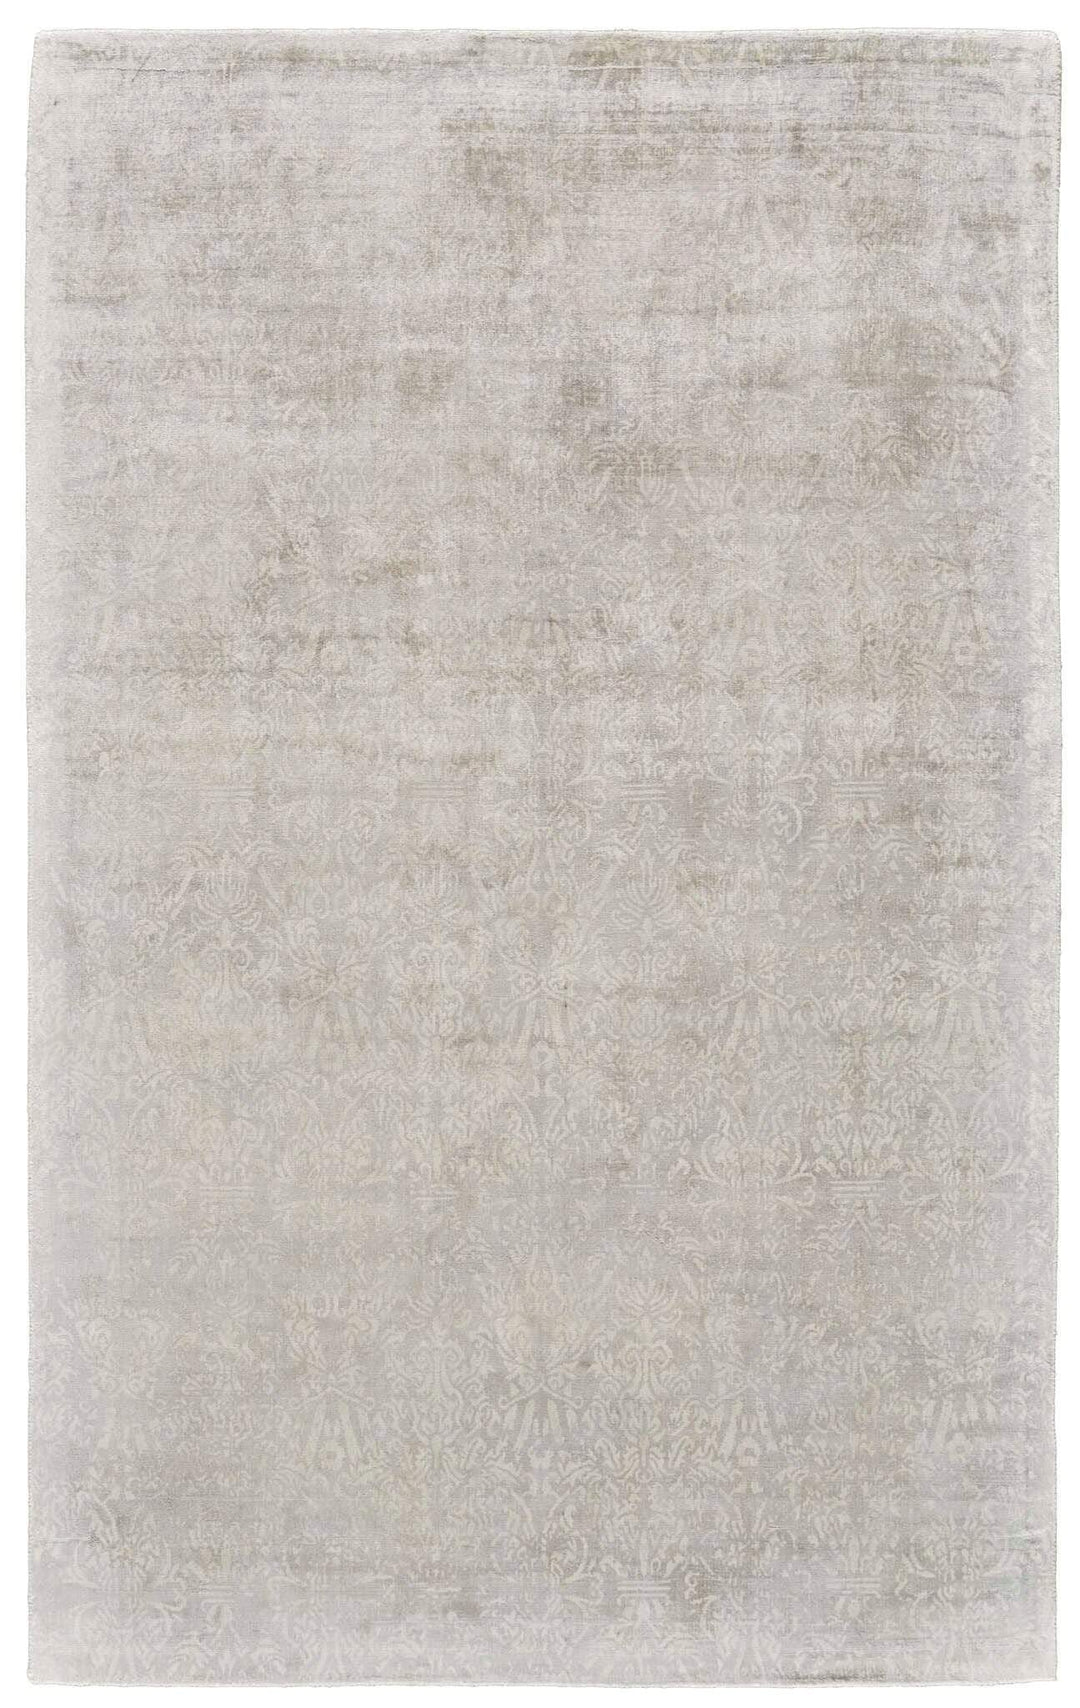 Feizy Feizy Nadia Distressed Damask Rug - Available in 4 Sizes - Silver Birch & Light Gray